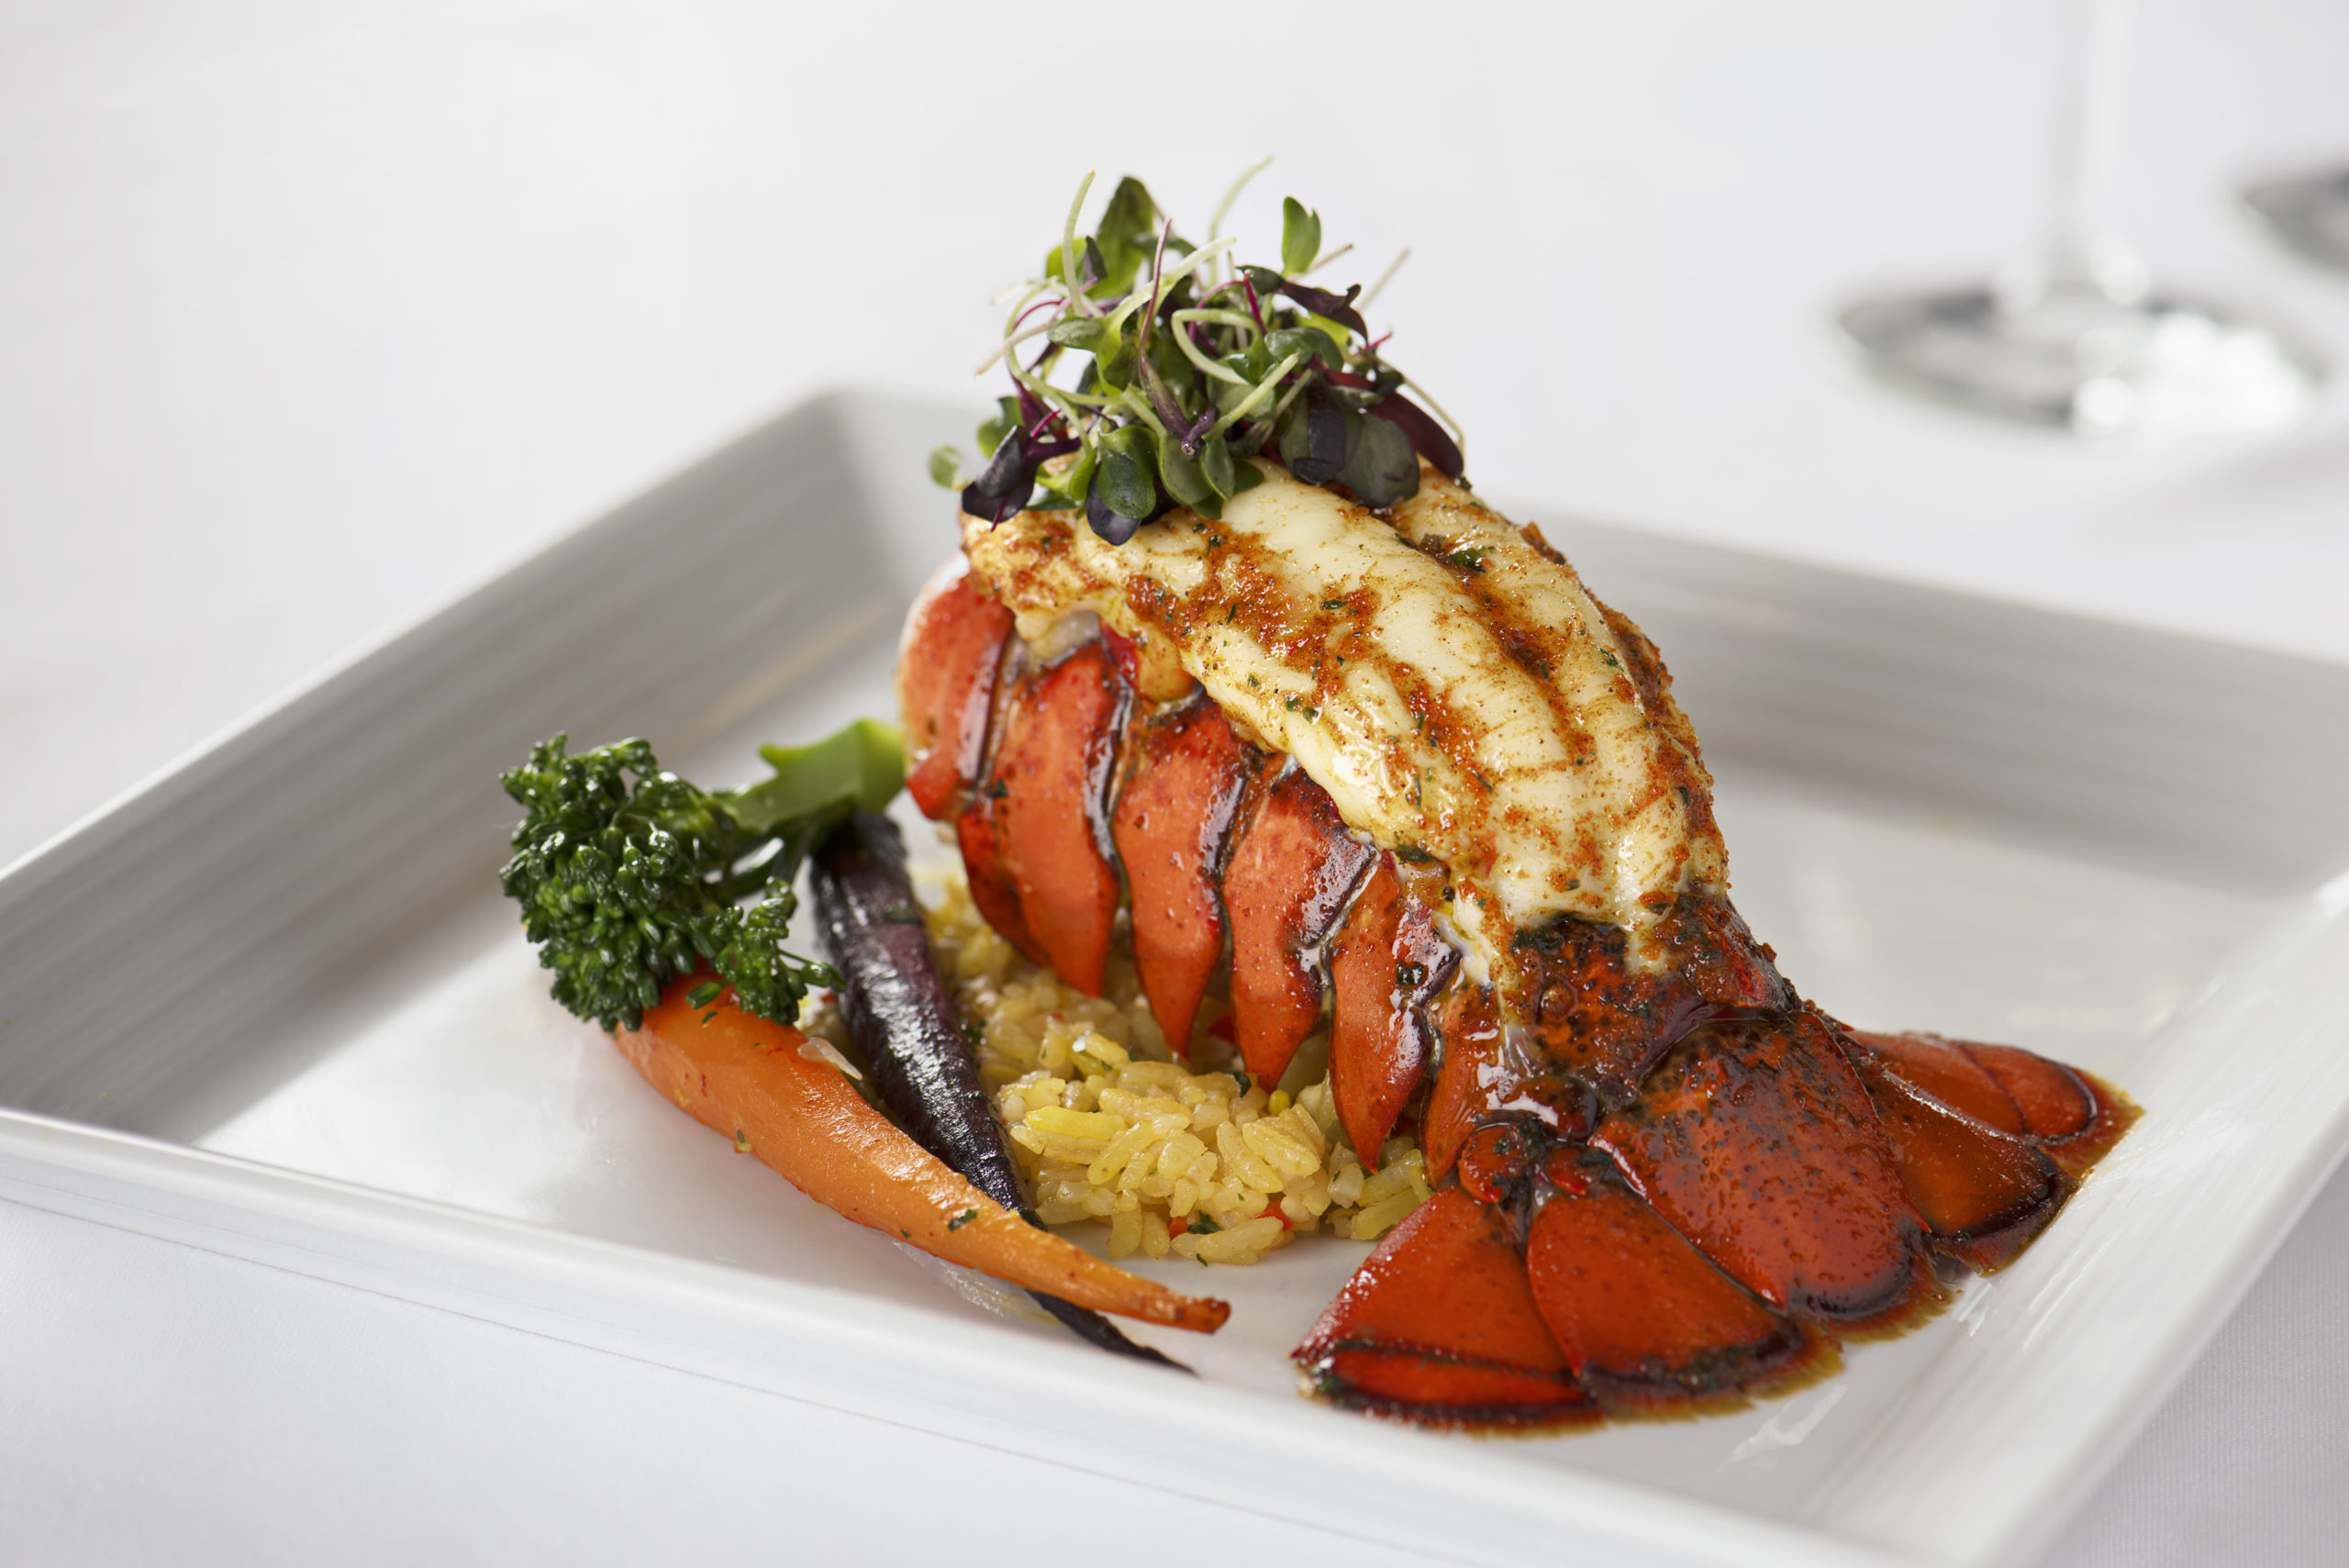 Lobster tail and rice.